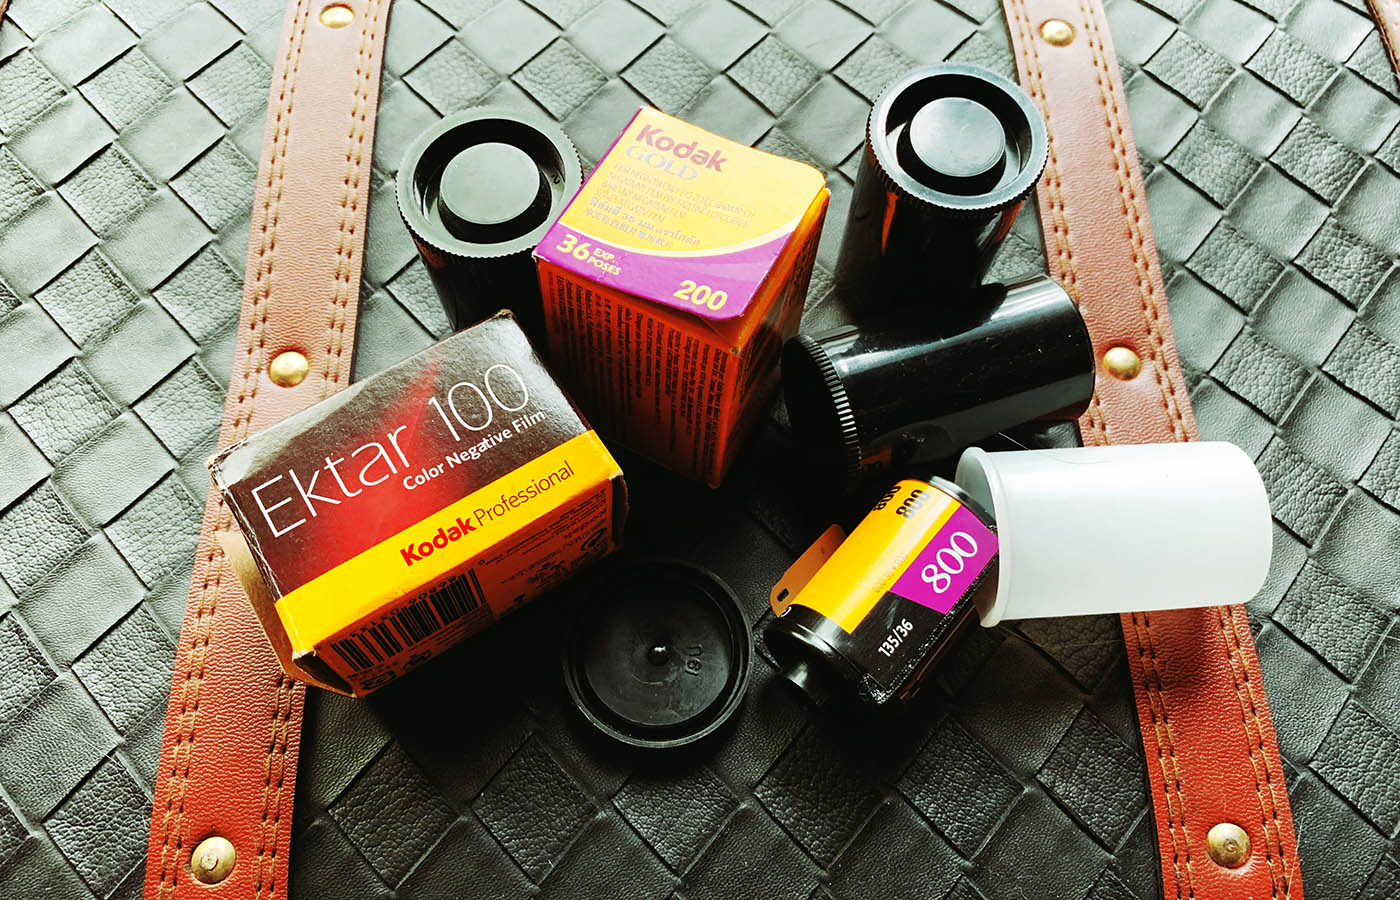 THE LOOK OF COLOR NEGATIVE FILM (C41)